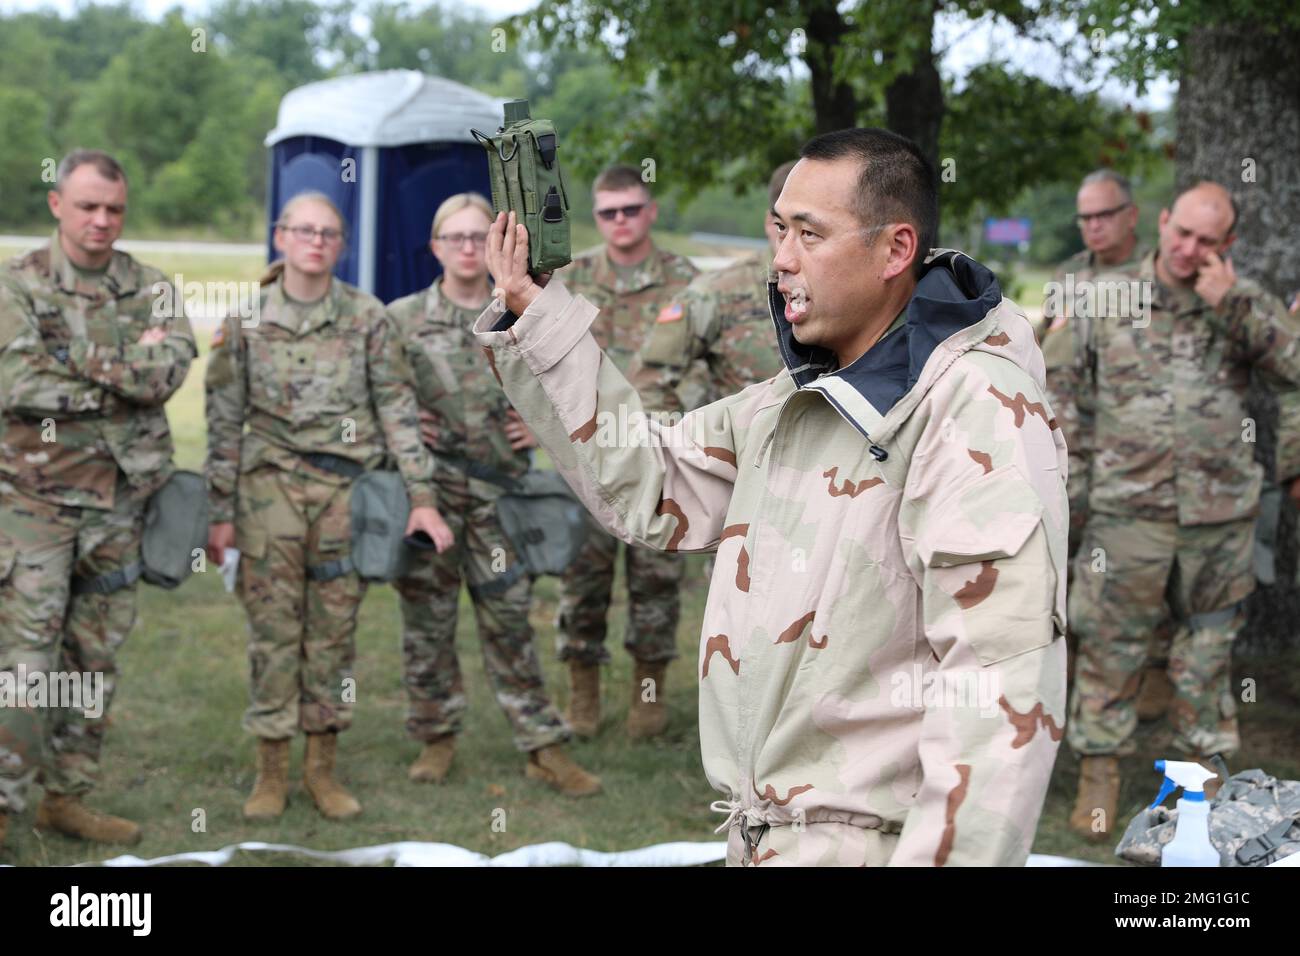 U.S. Army Capt. John Flegal, chemical, biological, radioactive and nuclear (CBRN) officer-in-charge, 37th Infantry Brigade Combat Team, briefs Soldiers following a CBRN training exercise at Camp Grayling, Michigan, Aug. 20, 2022. This training required Soldiers to be exposed to a mild and benign chemical irritant in order to build confidence in using their M50 Gas Mask. Stock Photo